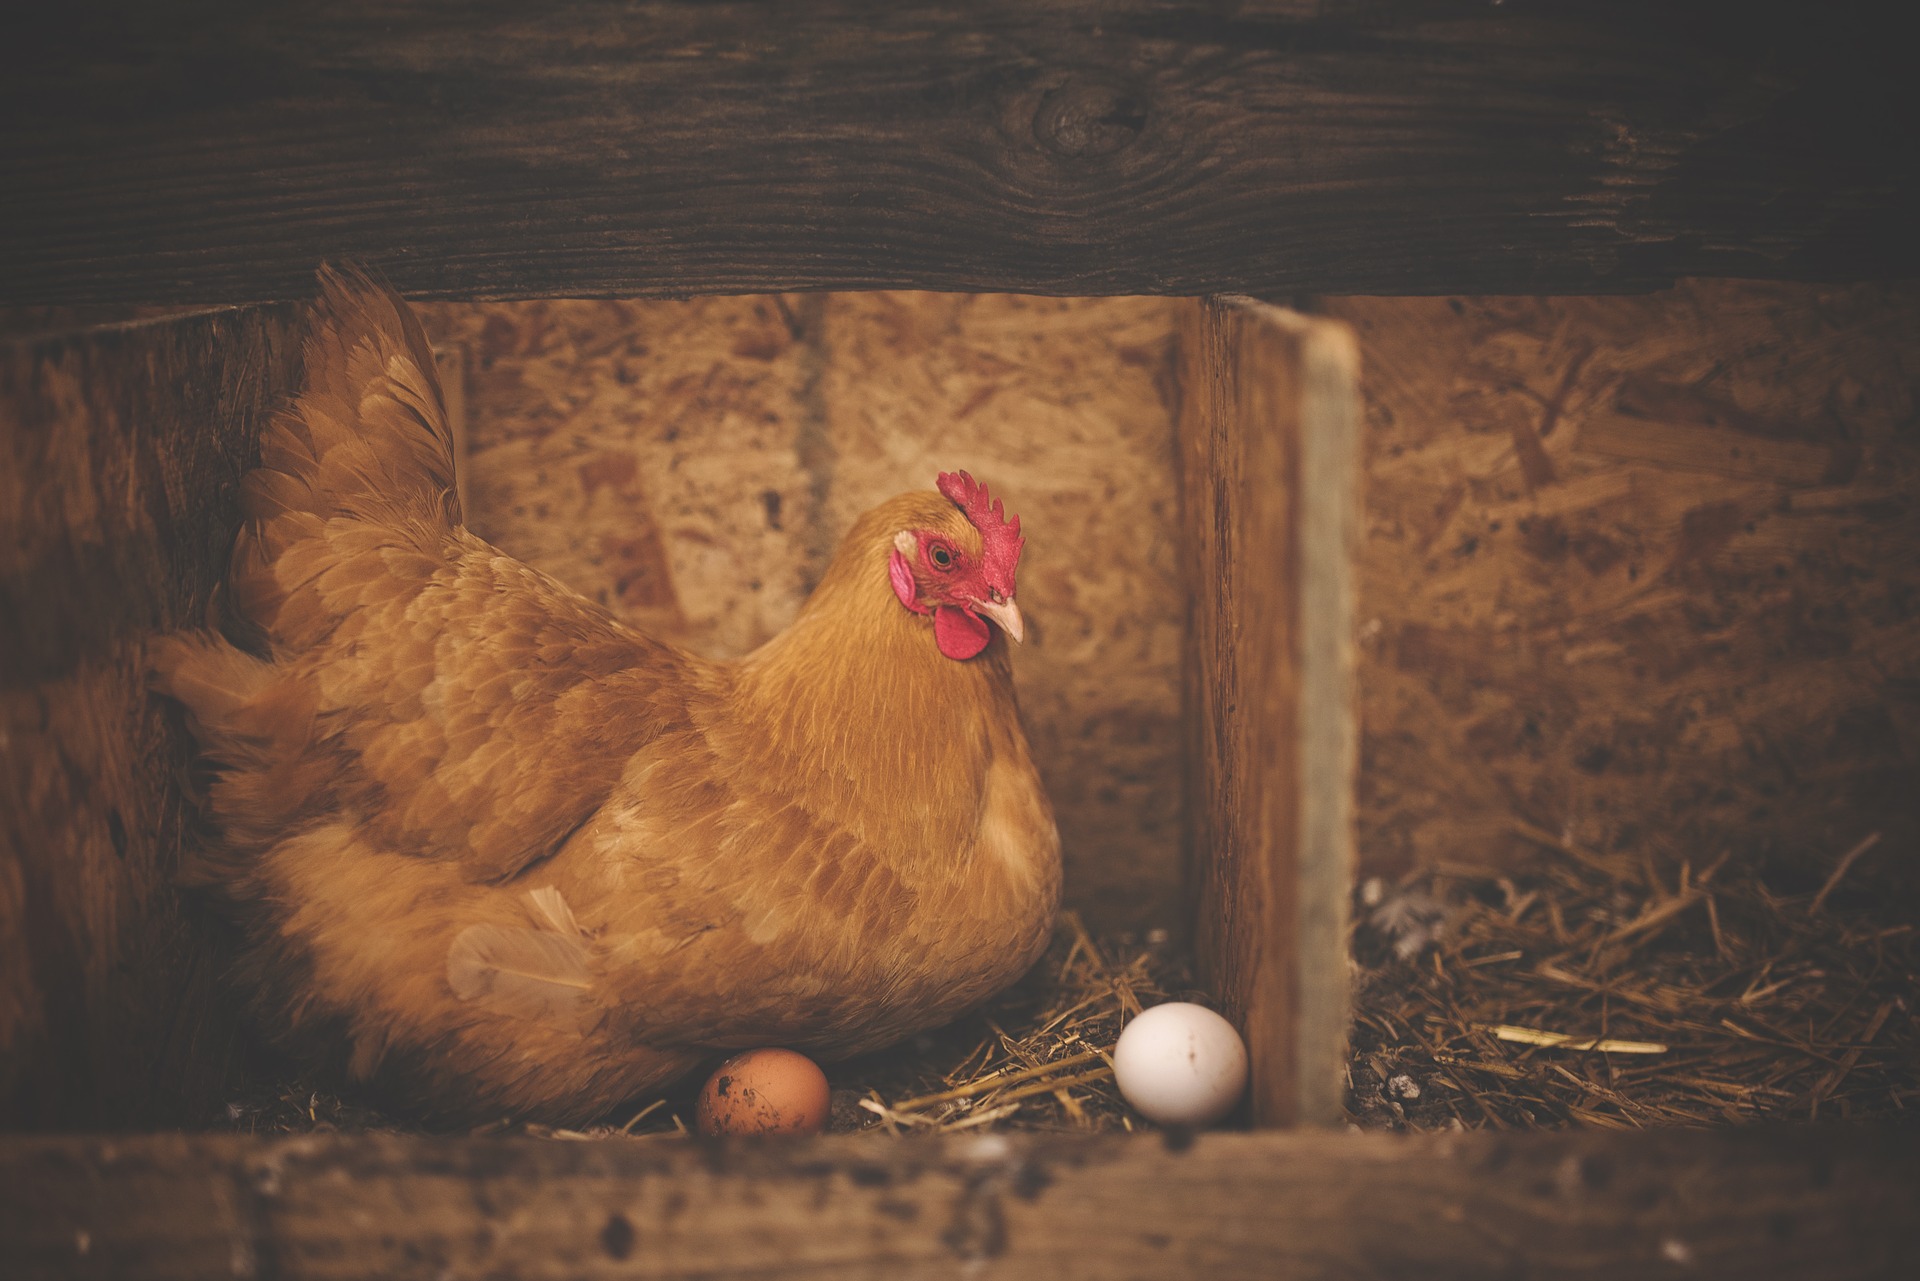 A chicken sitting in a barn next to two eggs